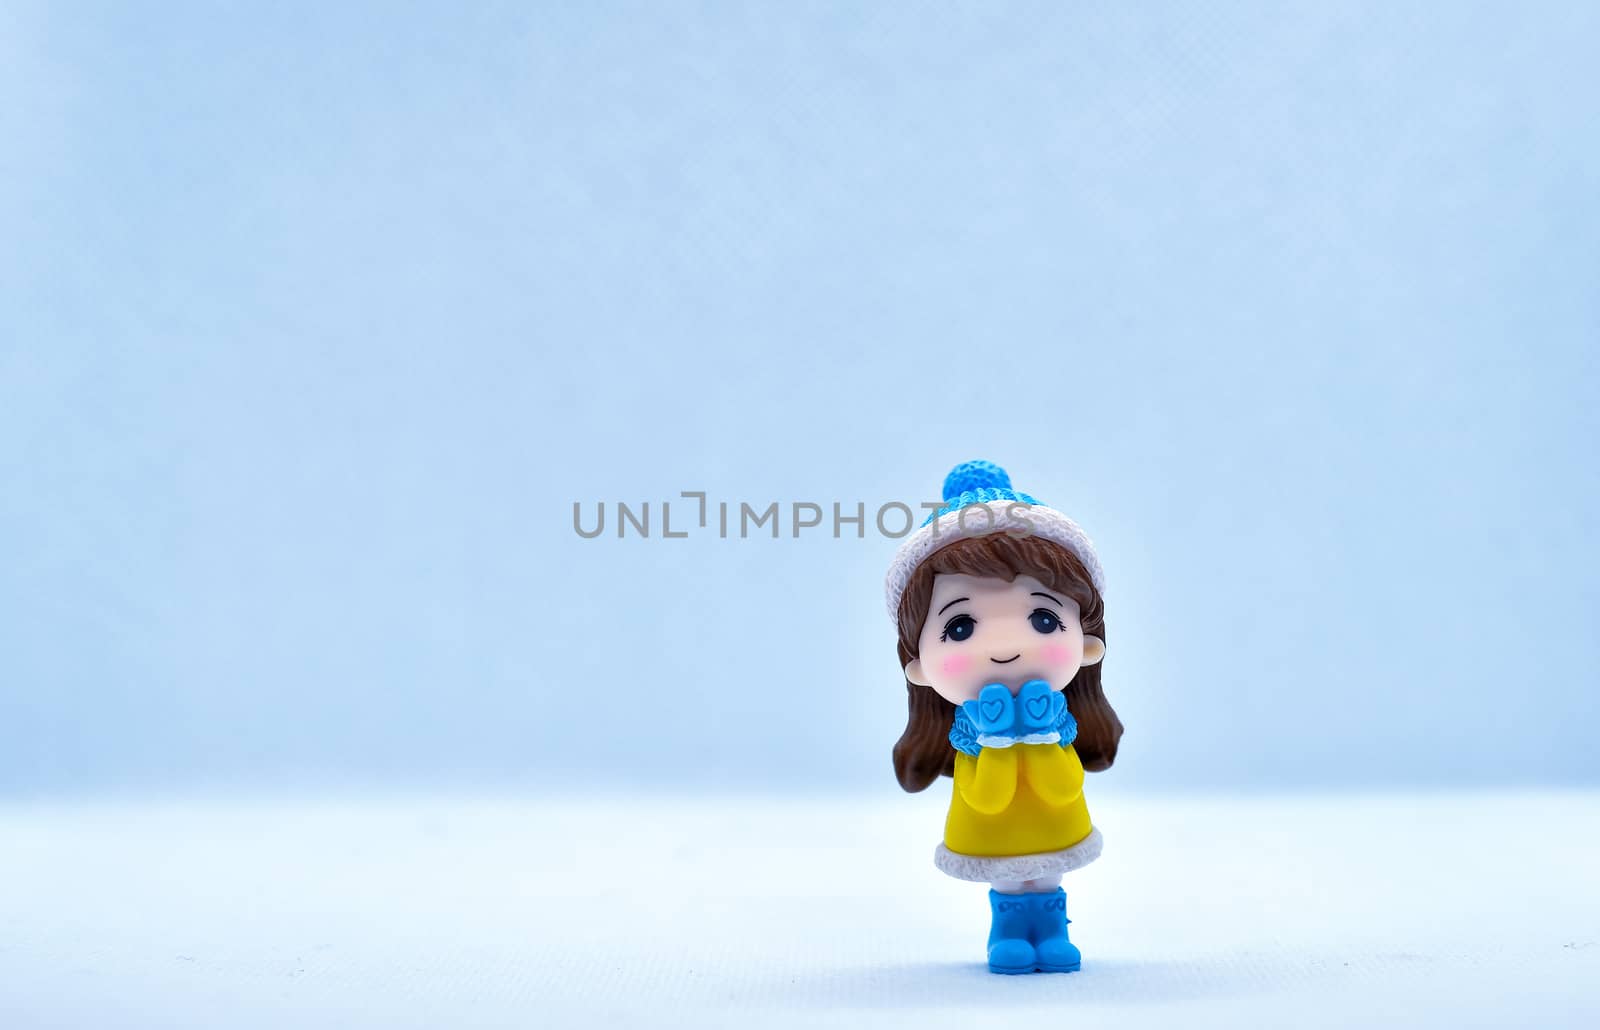 Tourism and travel concept: Miniature little girl standing in isolated background